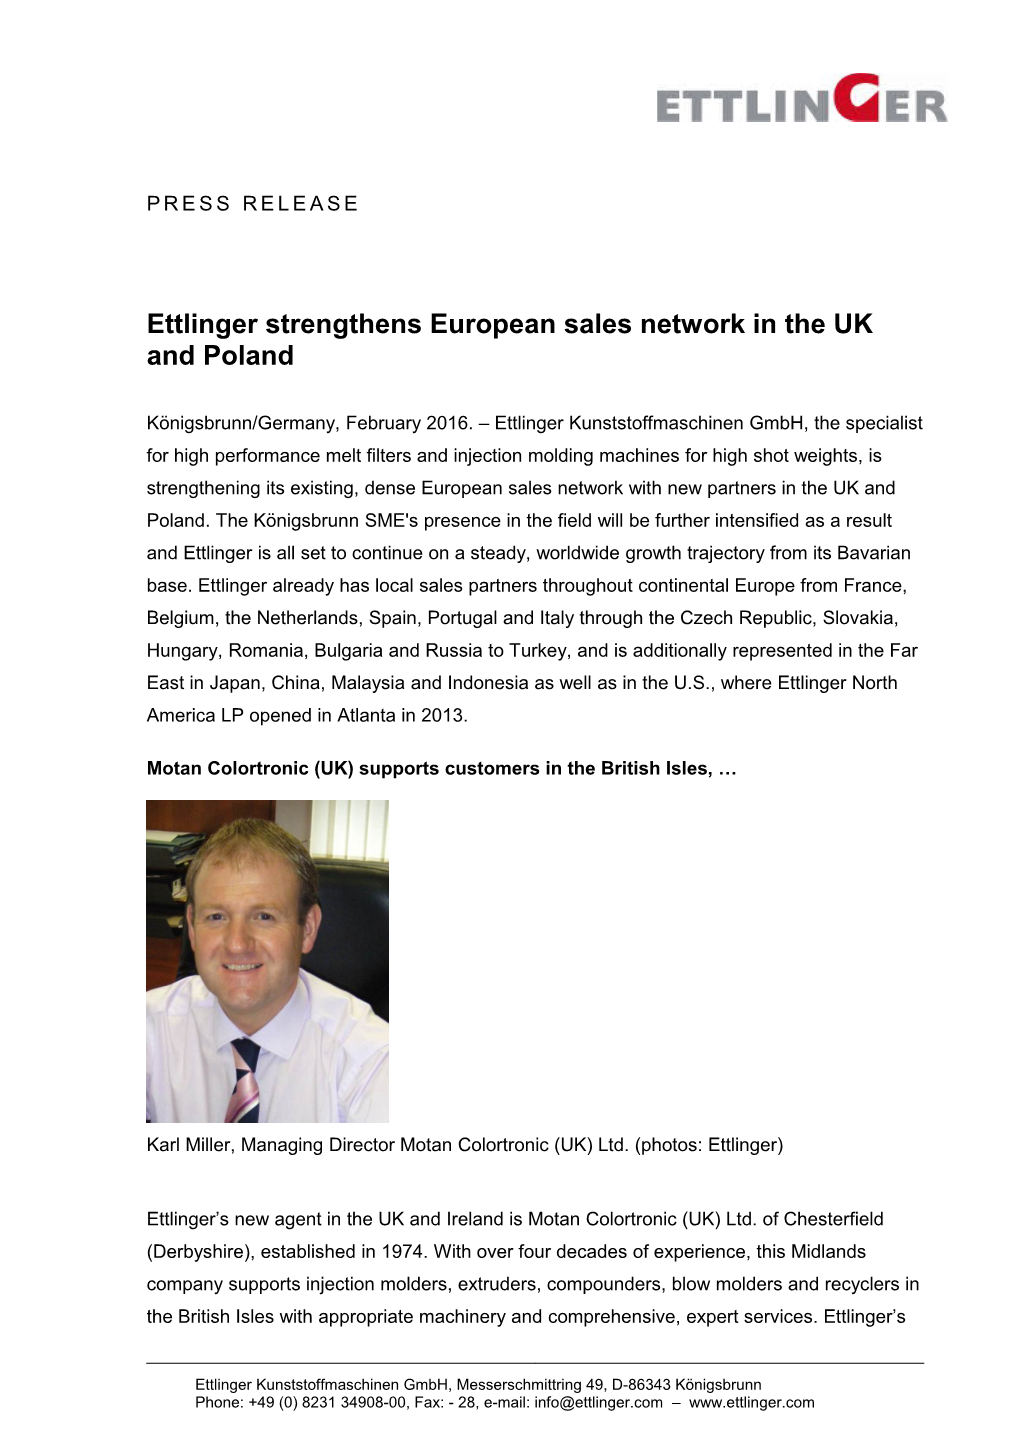 Page 1 of Press Release: Ettlinger Strengthens European Sales Network in the UK and Poland